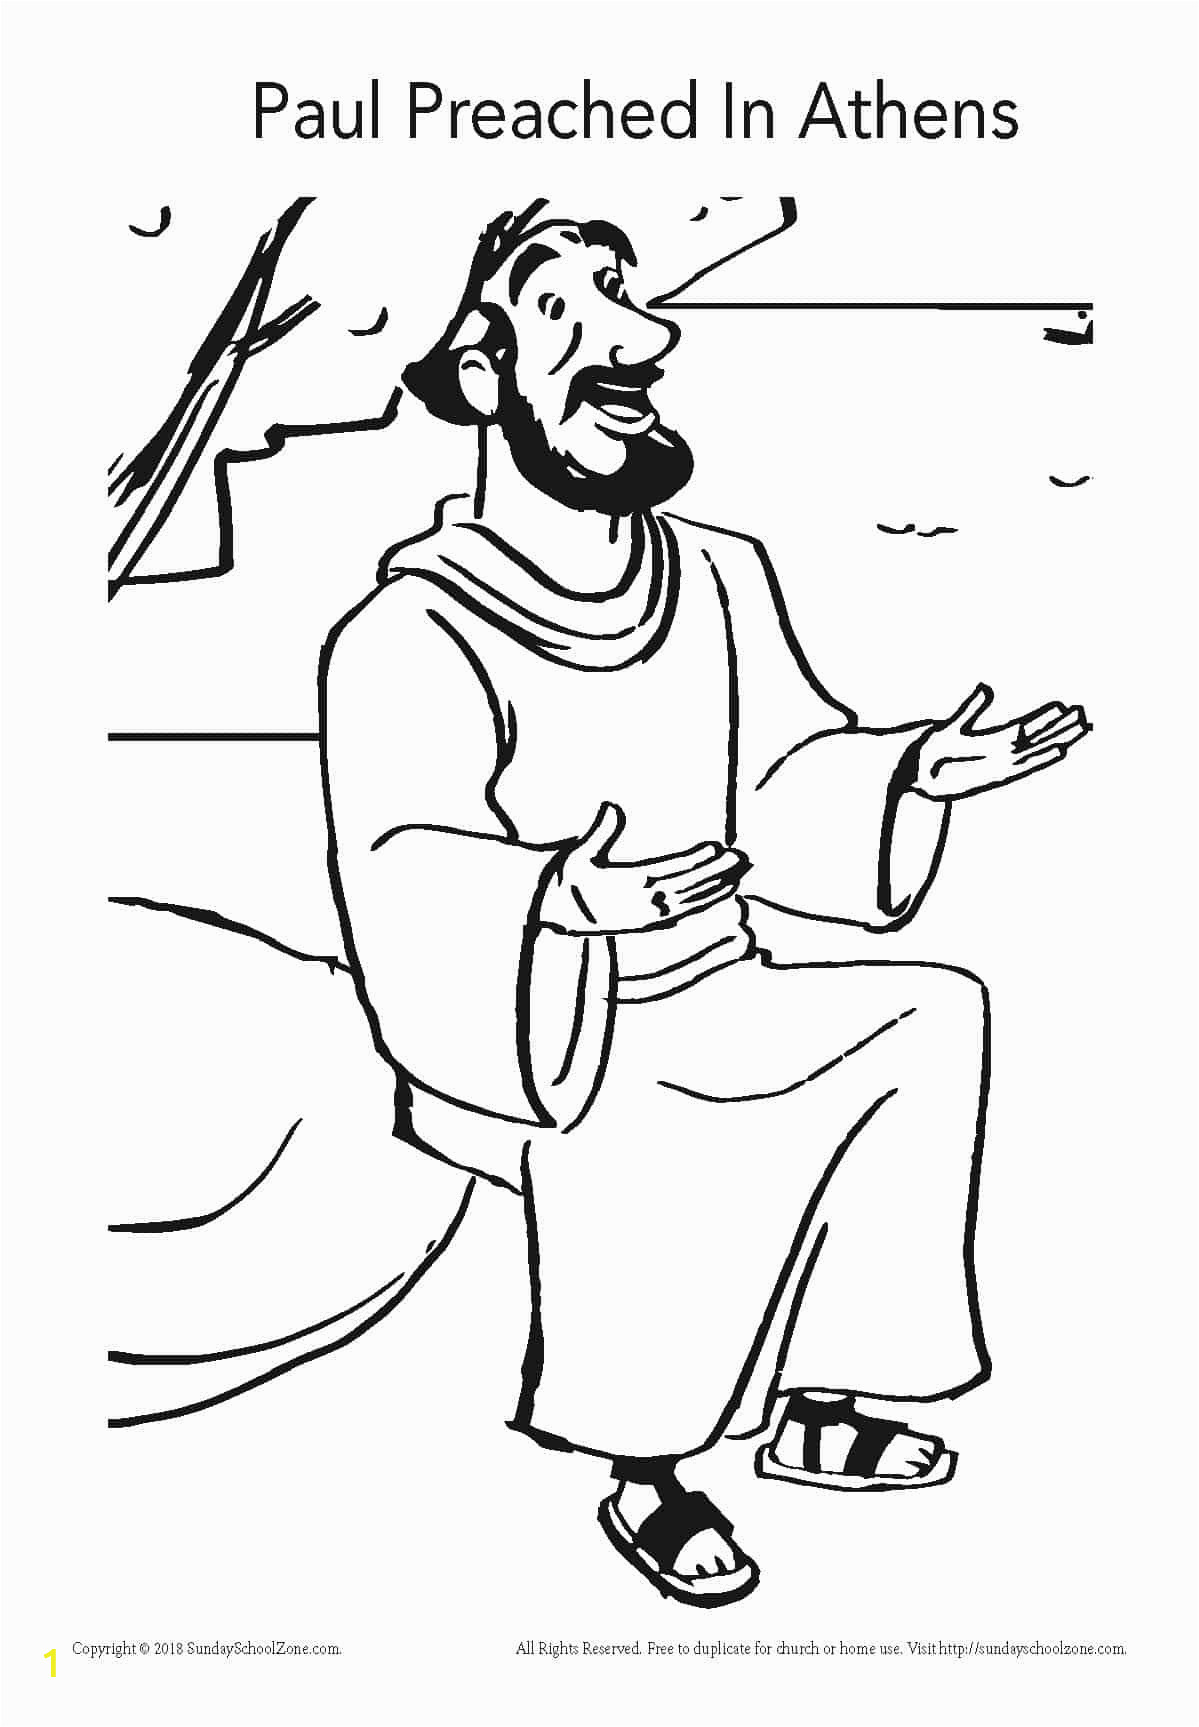 Paul Teaches In athens Coloring Page Paul Preached In athens Coloring Page On Sunday School Zone